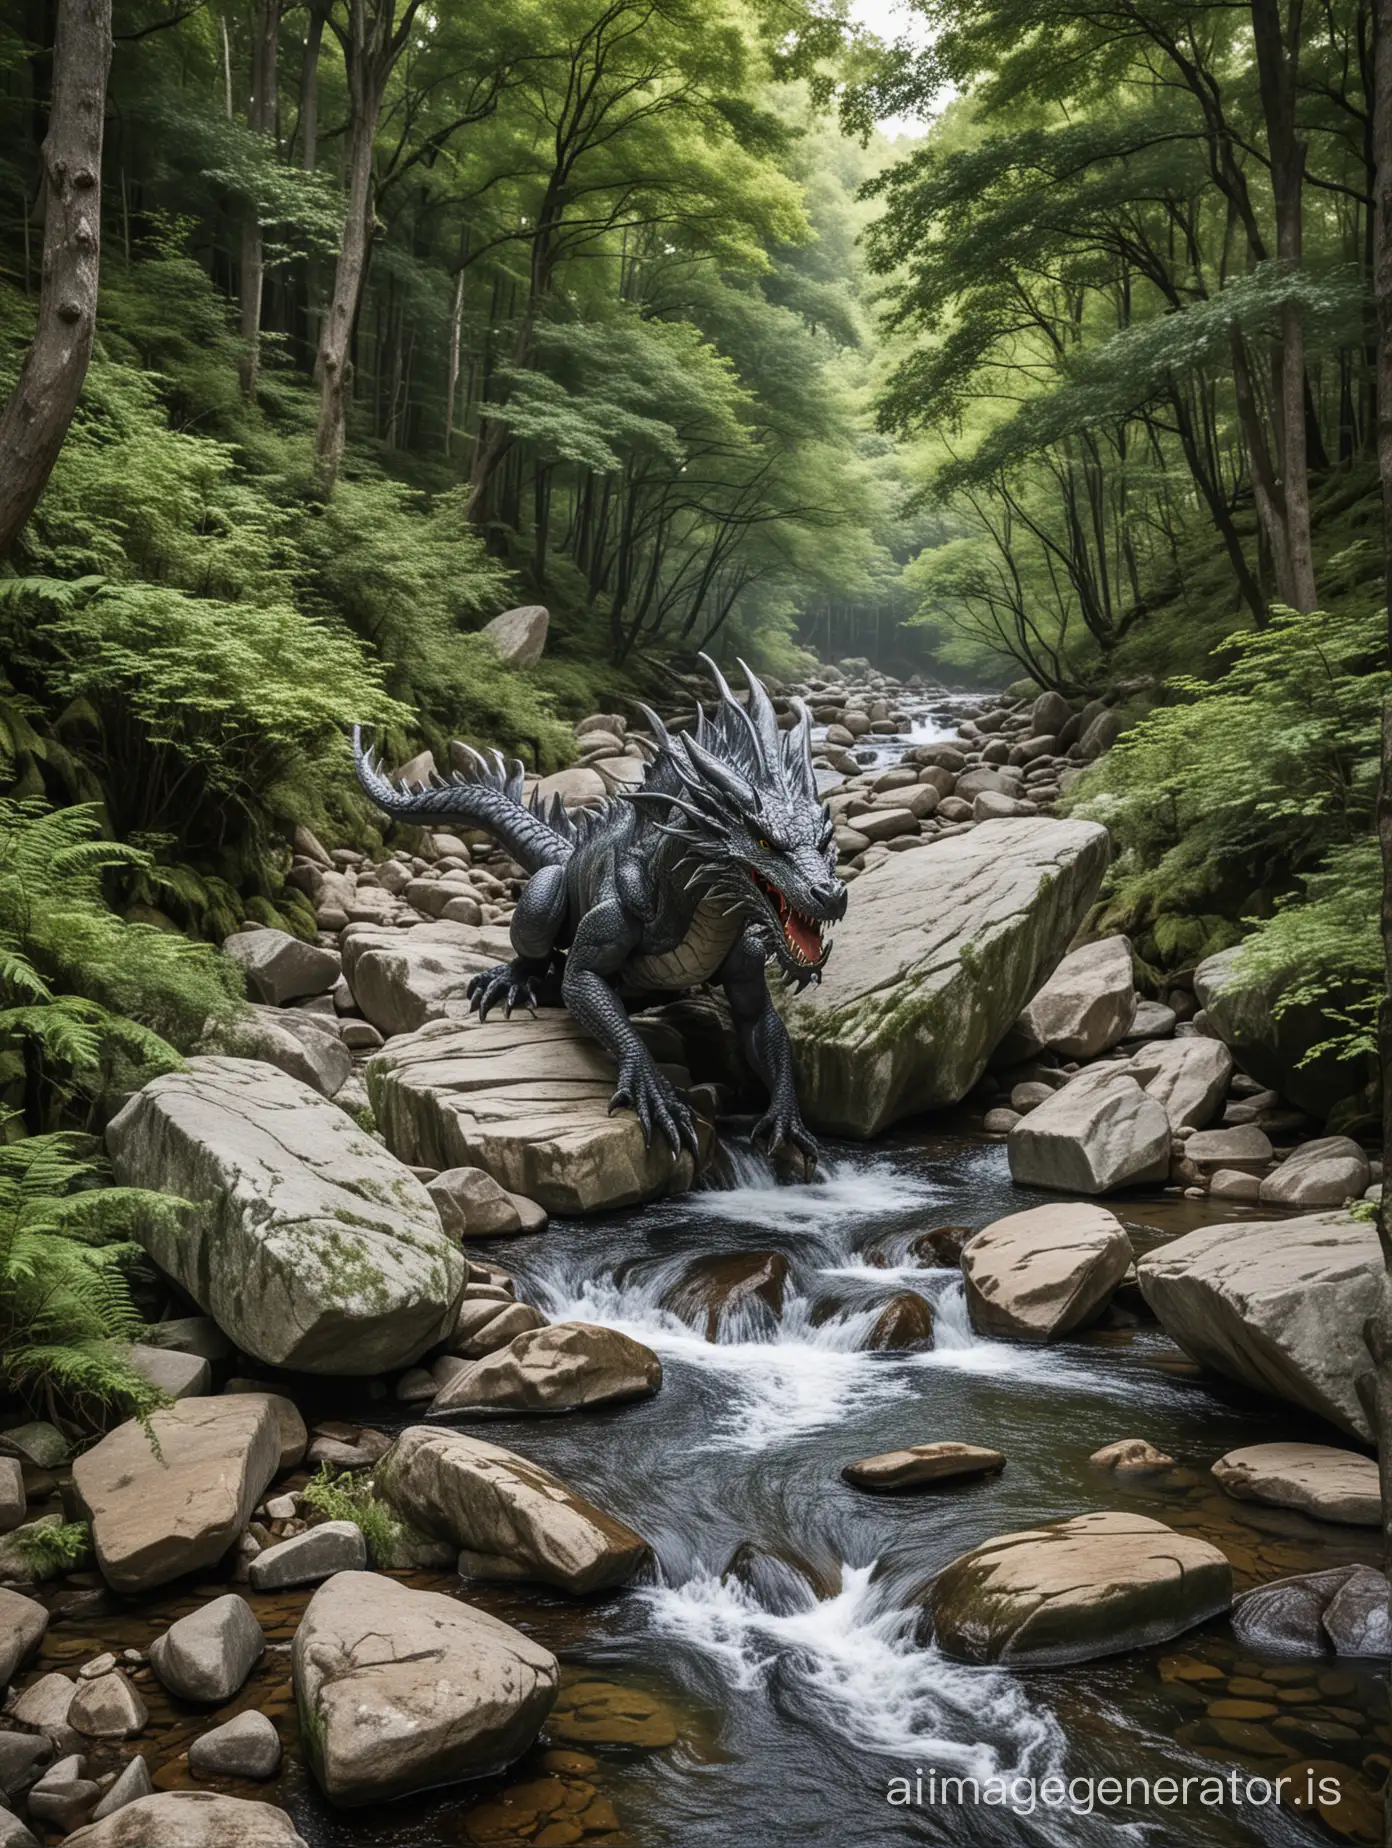 a dragon emerging from a river in a forest bordered by large rounded granite stones